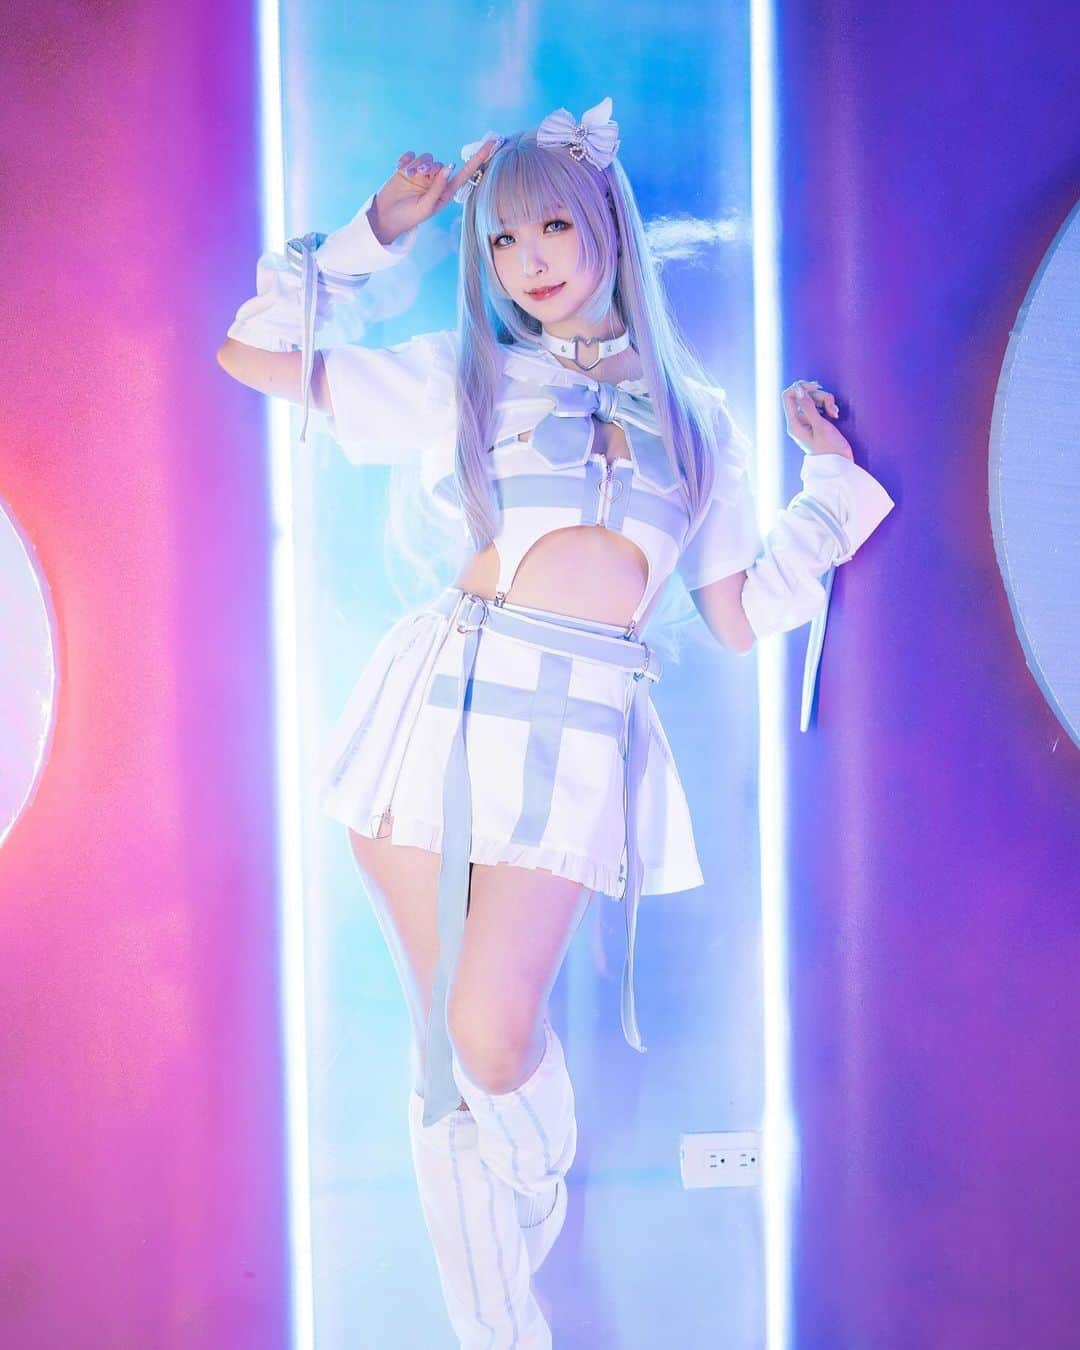 Sherryさんのインスタグラム写真 - (SherryInstagram)「- December Tier 2 - Bozi soda Silver! (´▽`ʃ♡ƪ)“ ❣️Full set photo ► https://reurl.cc/WEd7Rk  波子汽水銀登場!! (　ﾟ∀ﾟ) ﾉ♡ 甜甜的~ 清爽的~ 您一定會喜歡的♡♡  這麼快就到12月了!!! 感覺這一年真的過得好快.. 大家的桌曆是不是都翻到最後一頁了? 那就要一起迎接新的一年了(♡˙︶˙♡) 今個月訂閱Tier 4的話就能獲得2024的銀曆~ (是正常版的!) 喜歡的話要把我帶回家喔ε٩(๑> ₃ <)۶з  Bozi Soda Silver is here!! Sweet~ Refreshing~ You will definitely like it♡♡  It’s December so soon!!! It feels like this year has really gone by so fast.. Have everyone’s desk calendars been turned to the last page? Let’s welcome the new year together (♡˙︶˙♡) You will get the 2024 Silver Calendar if you subscribe to Tier 4 this month~ Just take me home if you like it! ε٩(๑> ₃ <)۶з  #cosplay#cosplayer #cosplaygirl #photo #cosplayphoto #cosplayersofinstagram #cosplayphotography #anime #silverxherecosplay #patreoncreator #patreonartist  #コスプレ　#コスプレイヤー　#コスプレイヤーさんと繋がりたい　#コスプレ写真」12月8日 18時00分 - silverxhere